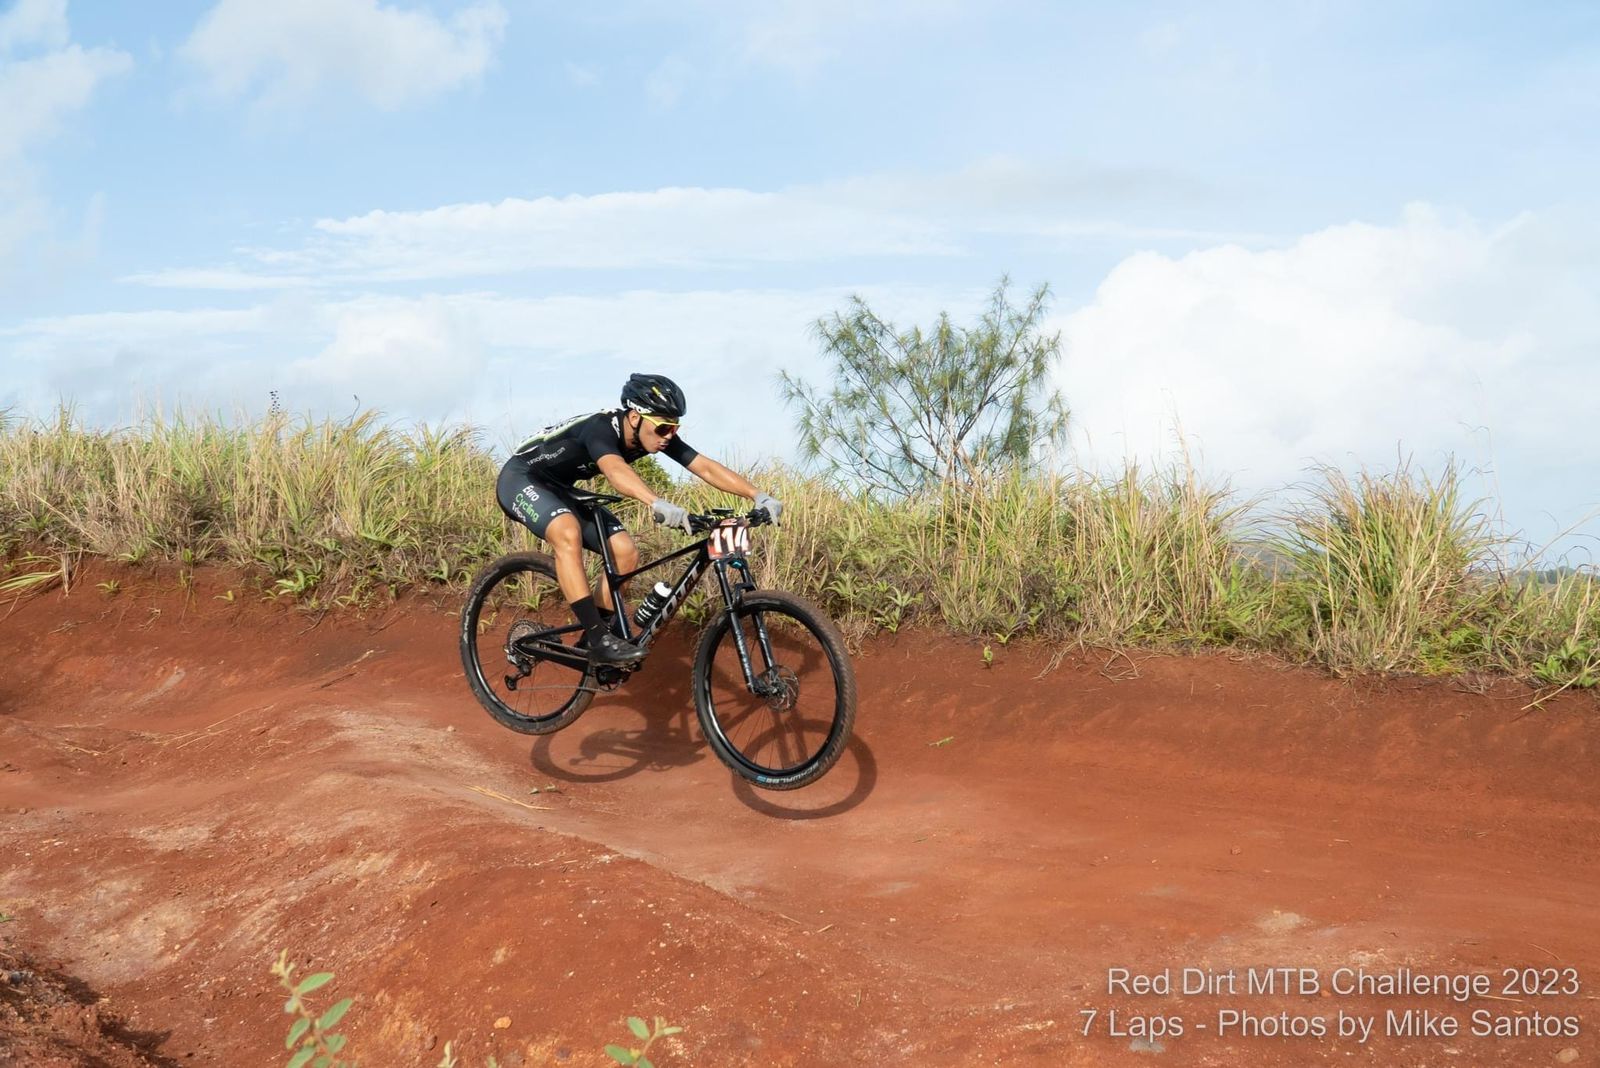 Relive the Excitement From Blayde BLAS’ Race at the Red Dirt MTB Event